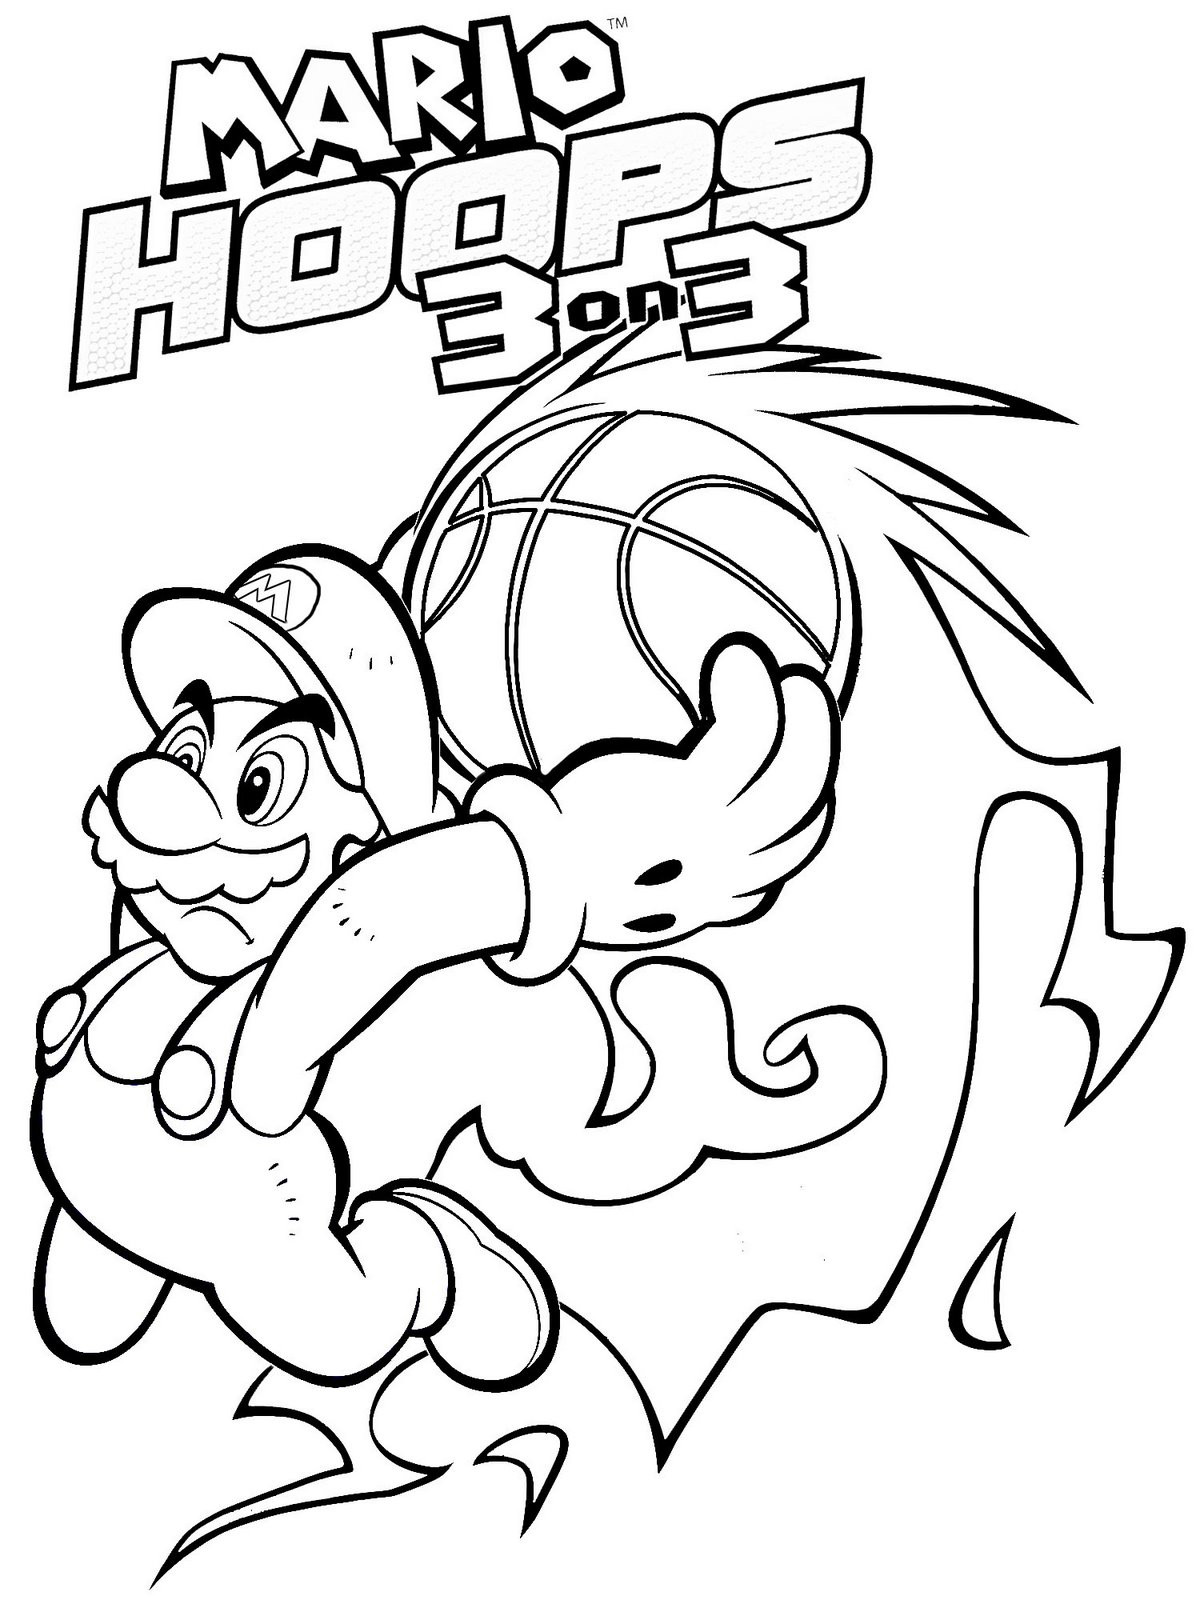 Mario Bros Coloring Pages
 9 Free Mario Bros Coloring Pages for Kids Disney